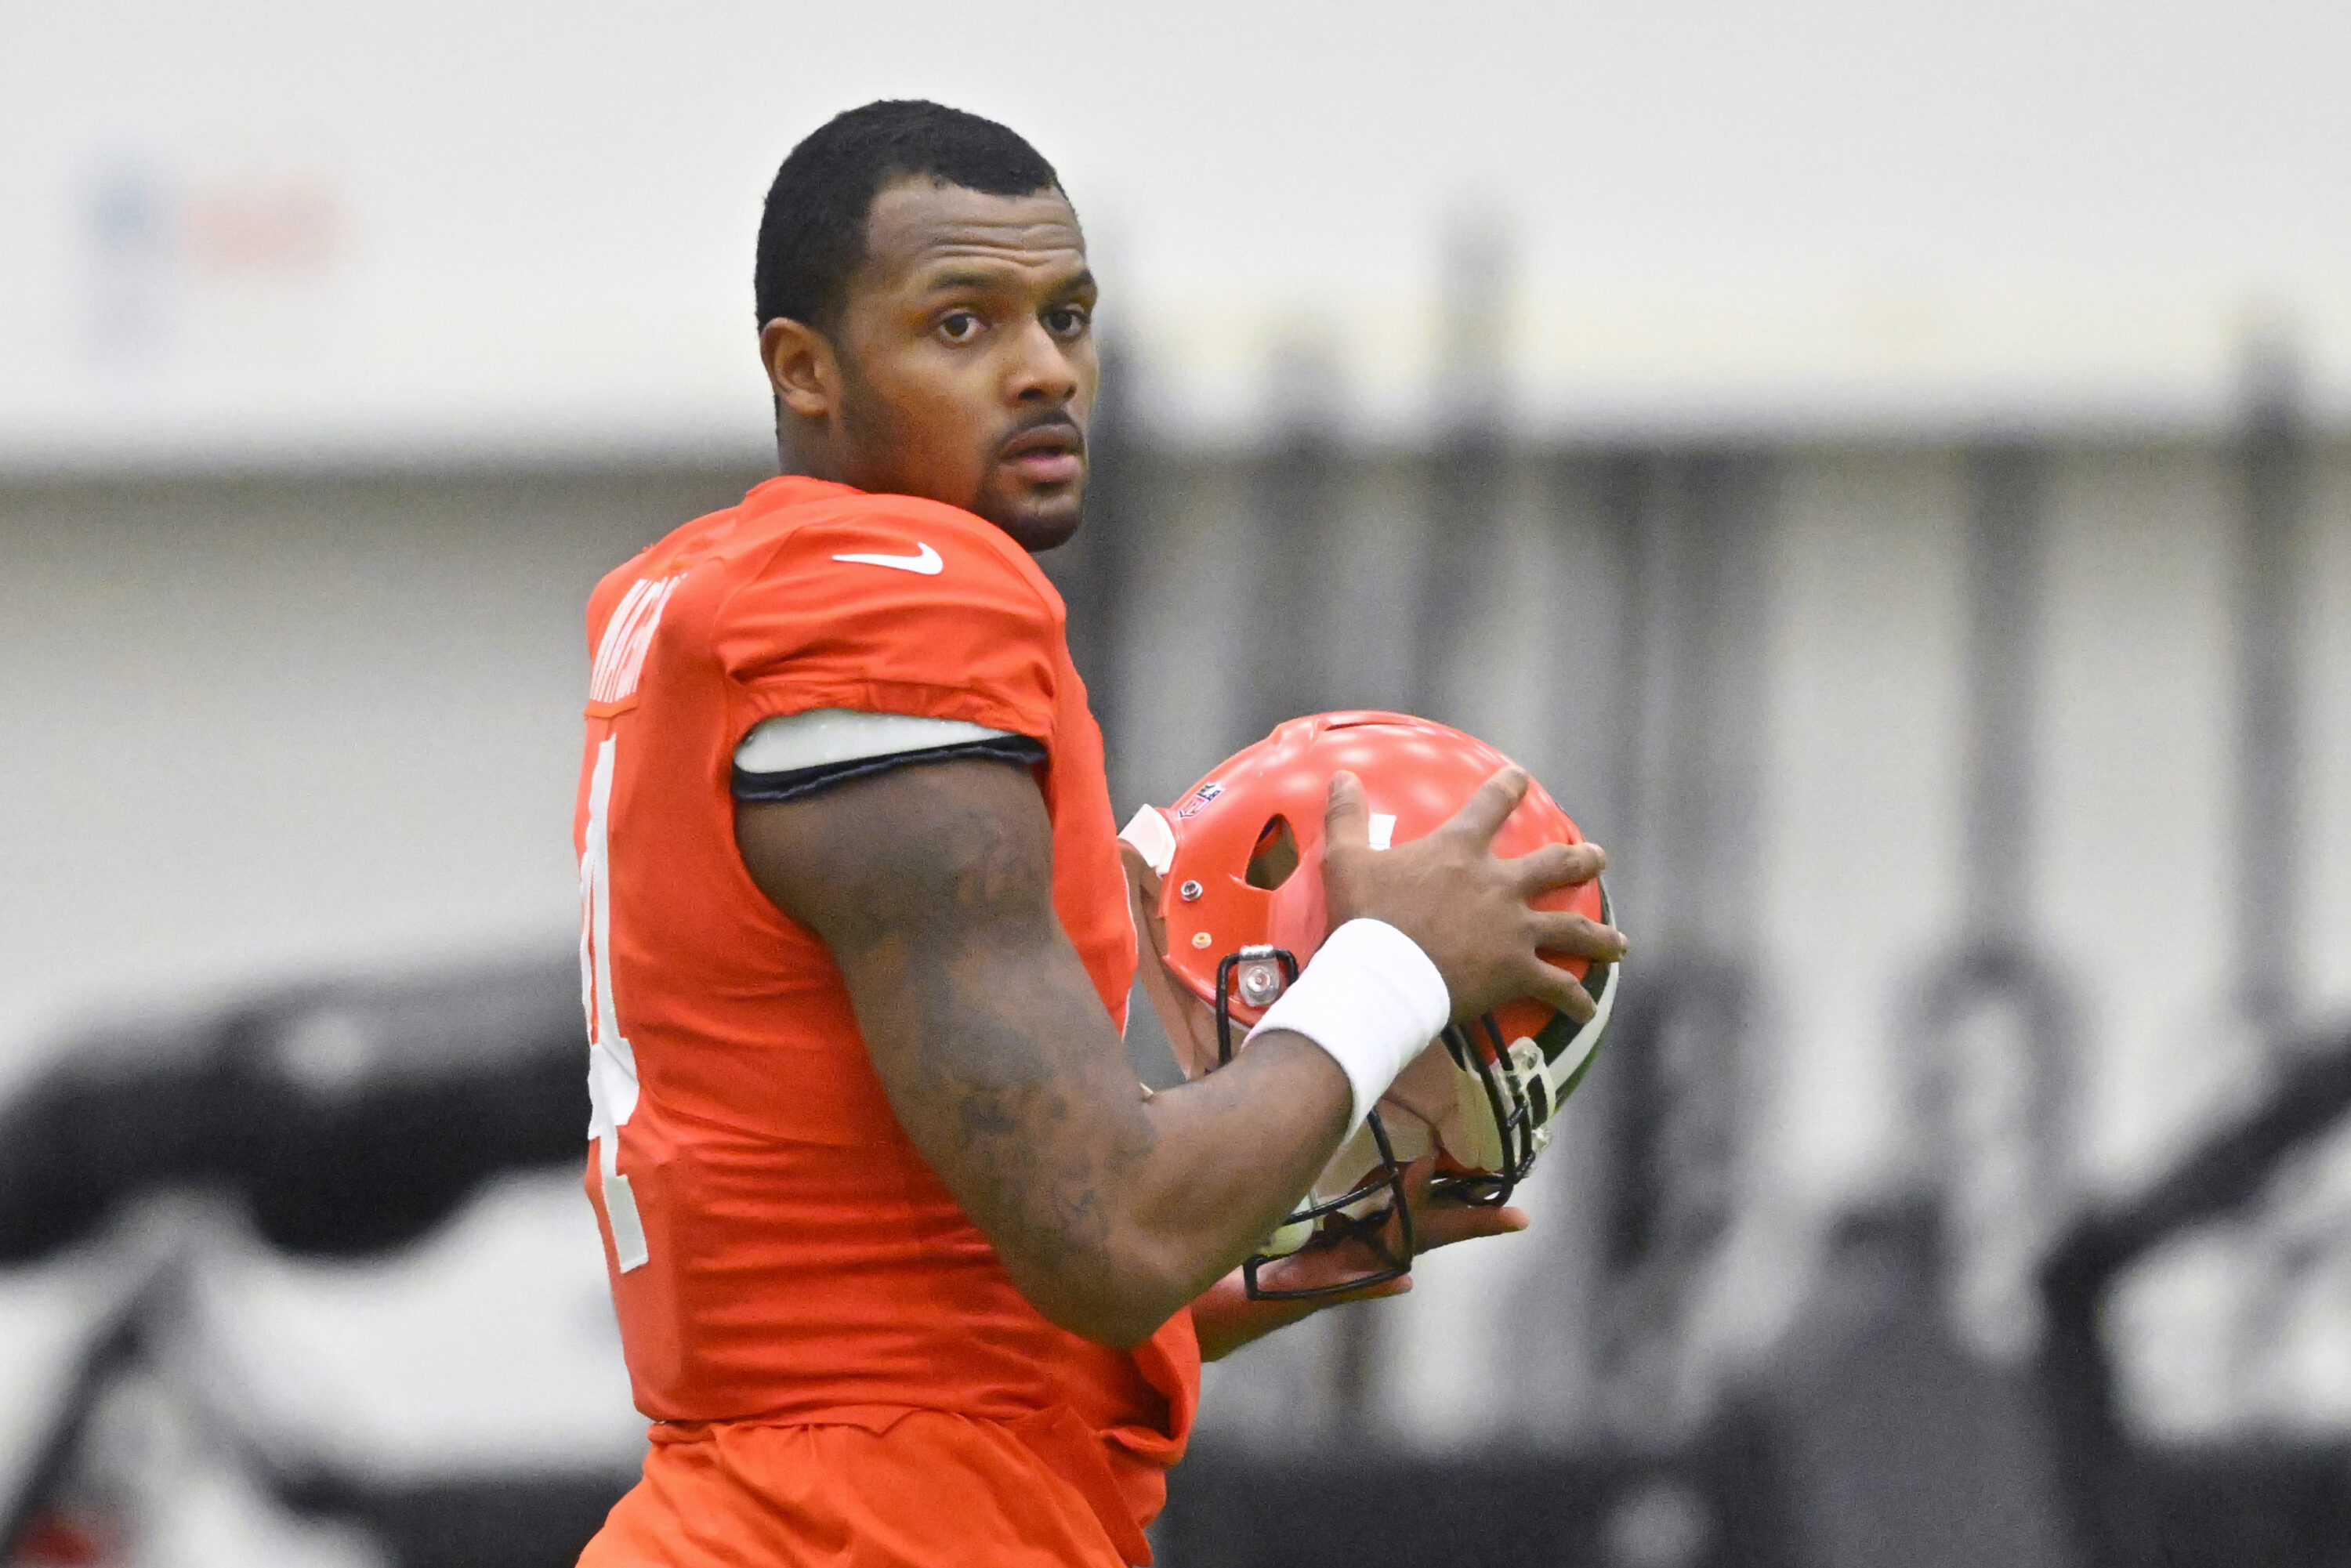 Cleveland Browns quarterback Deshaun Watson stands on the field during an NFL football practice at the team's training facility Wednesday, Nov. 30, 2022, in Berea, Ohio.